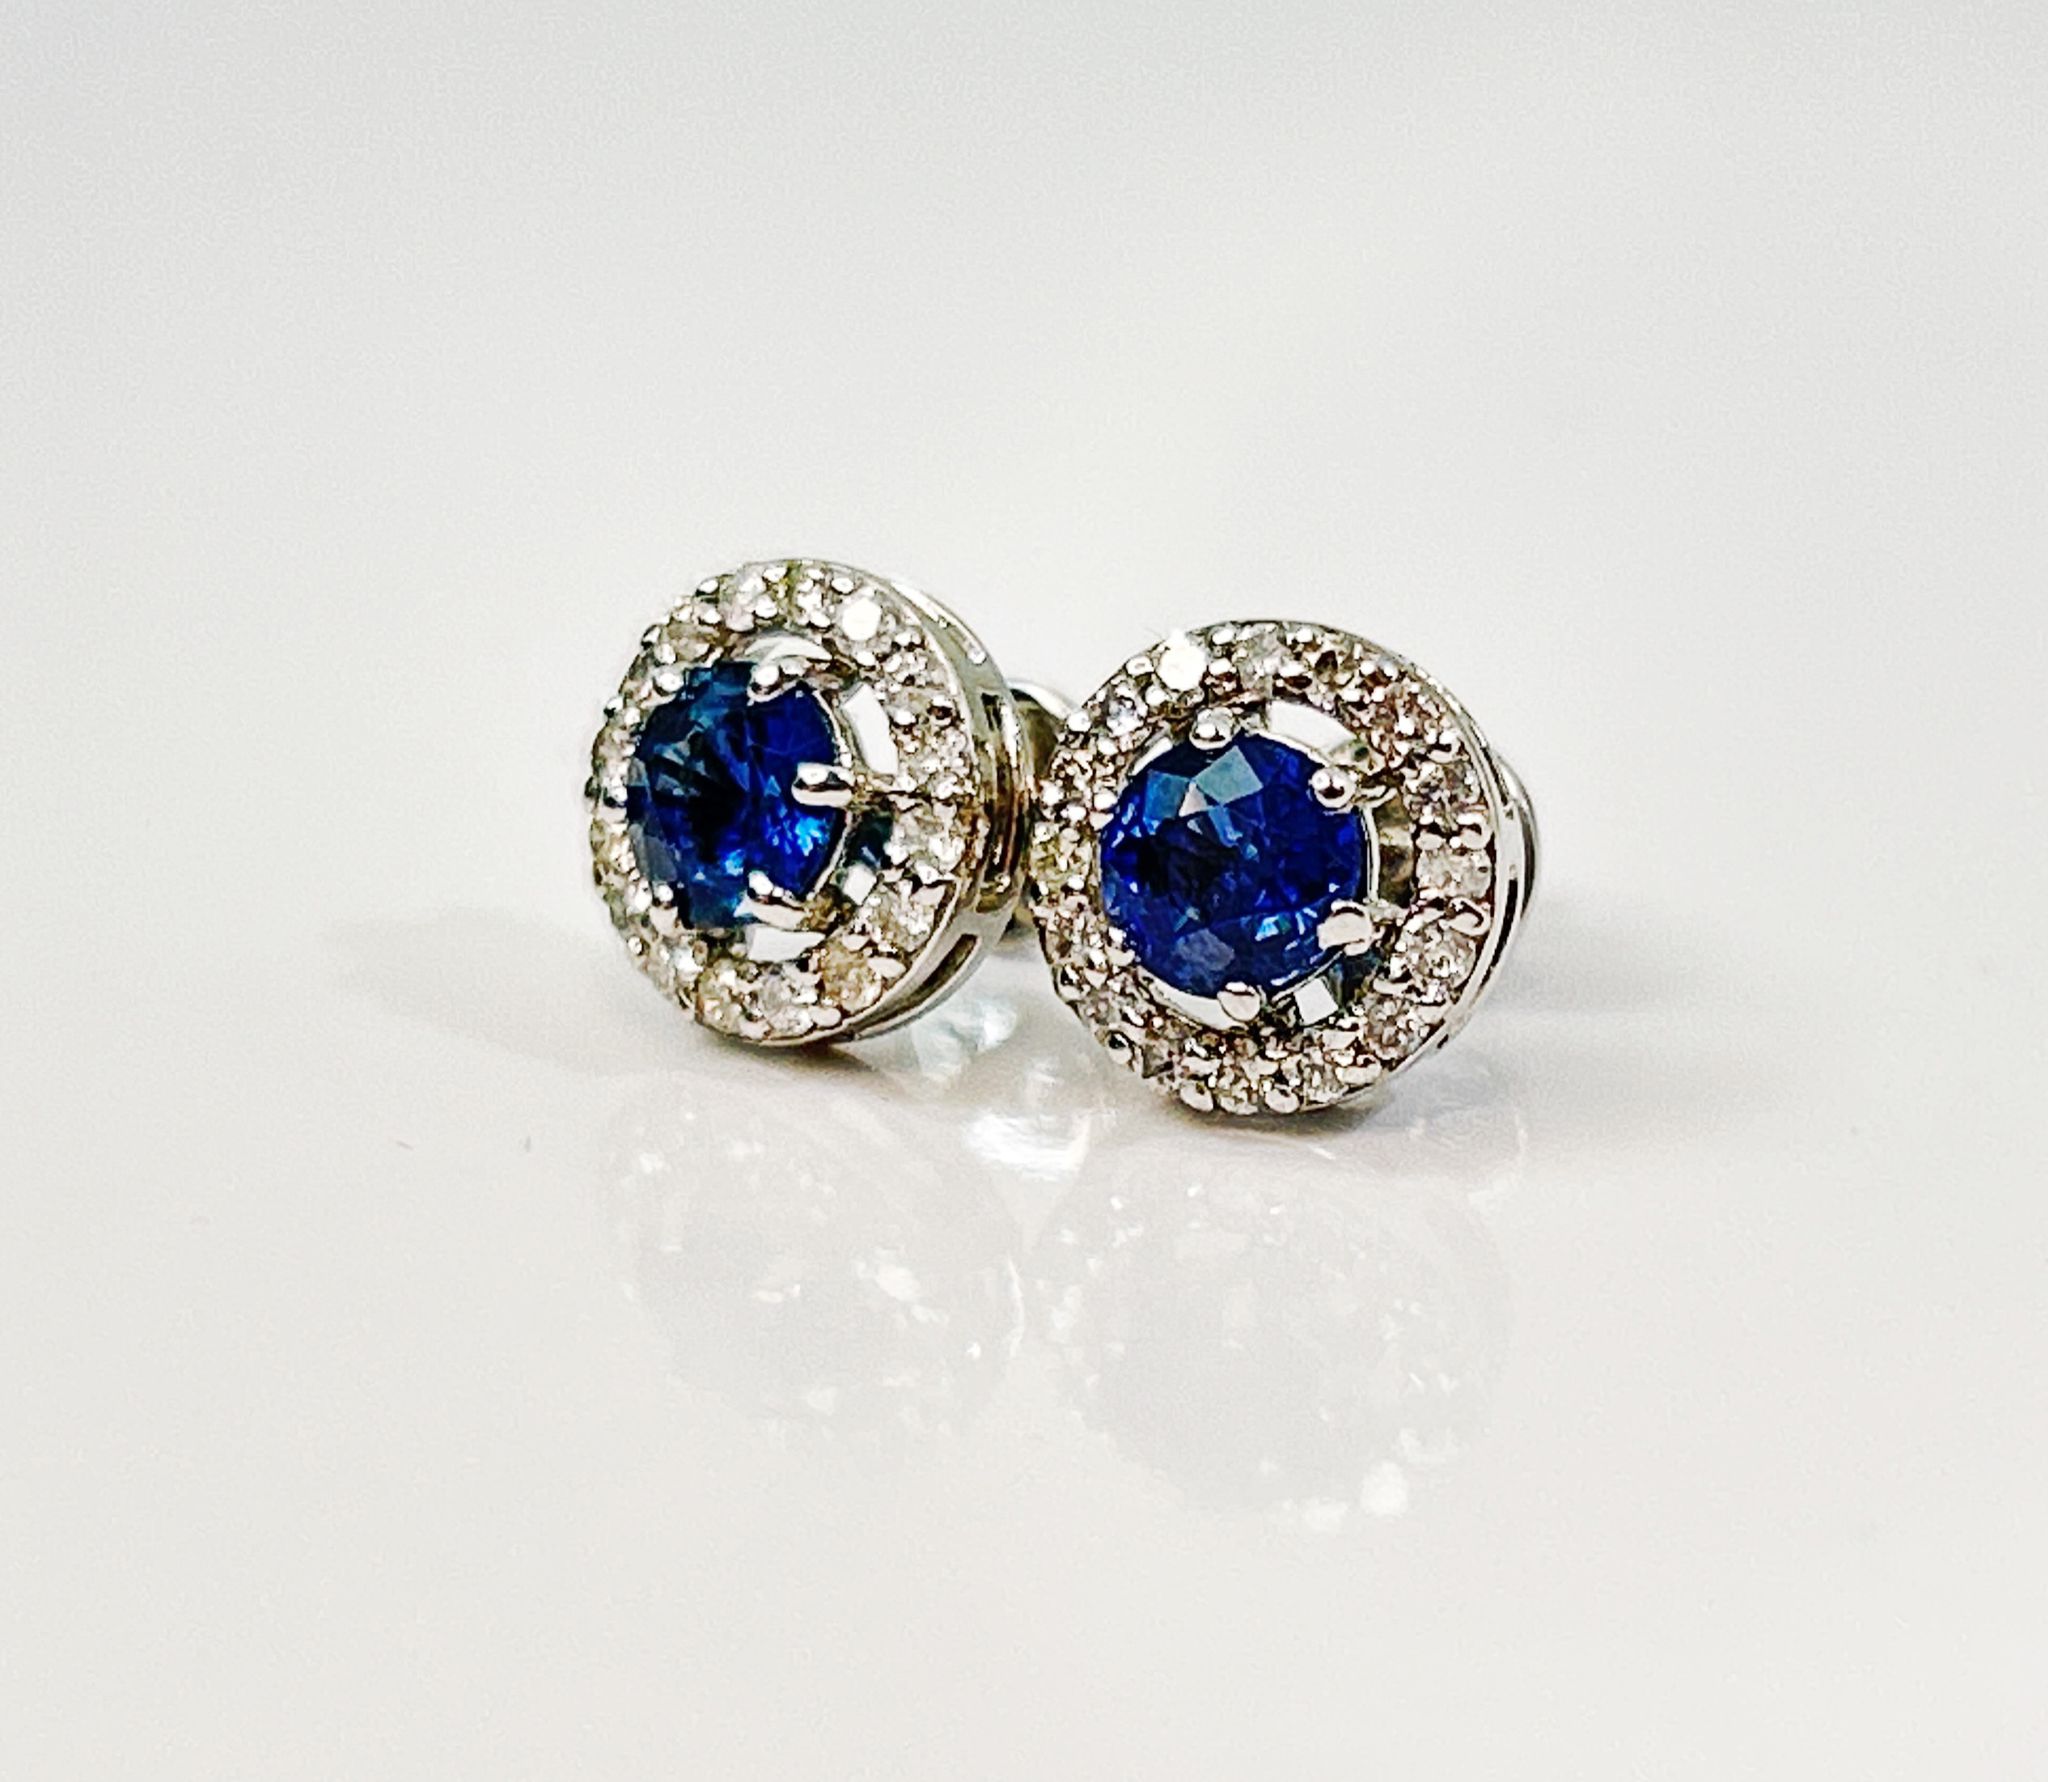 Beautiful Natural Unheated Blue Sapphire Earrings With Diamonds & Platinum - Image 2 of 6